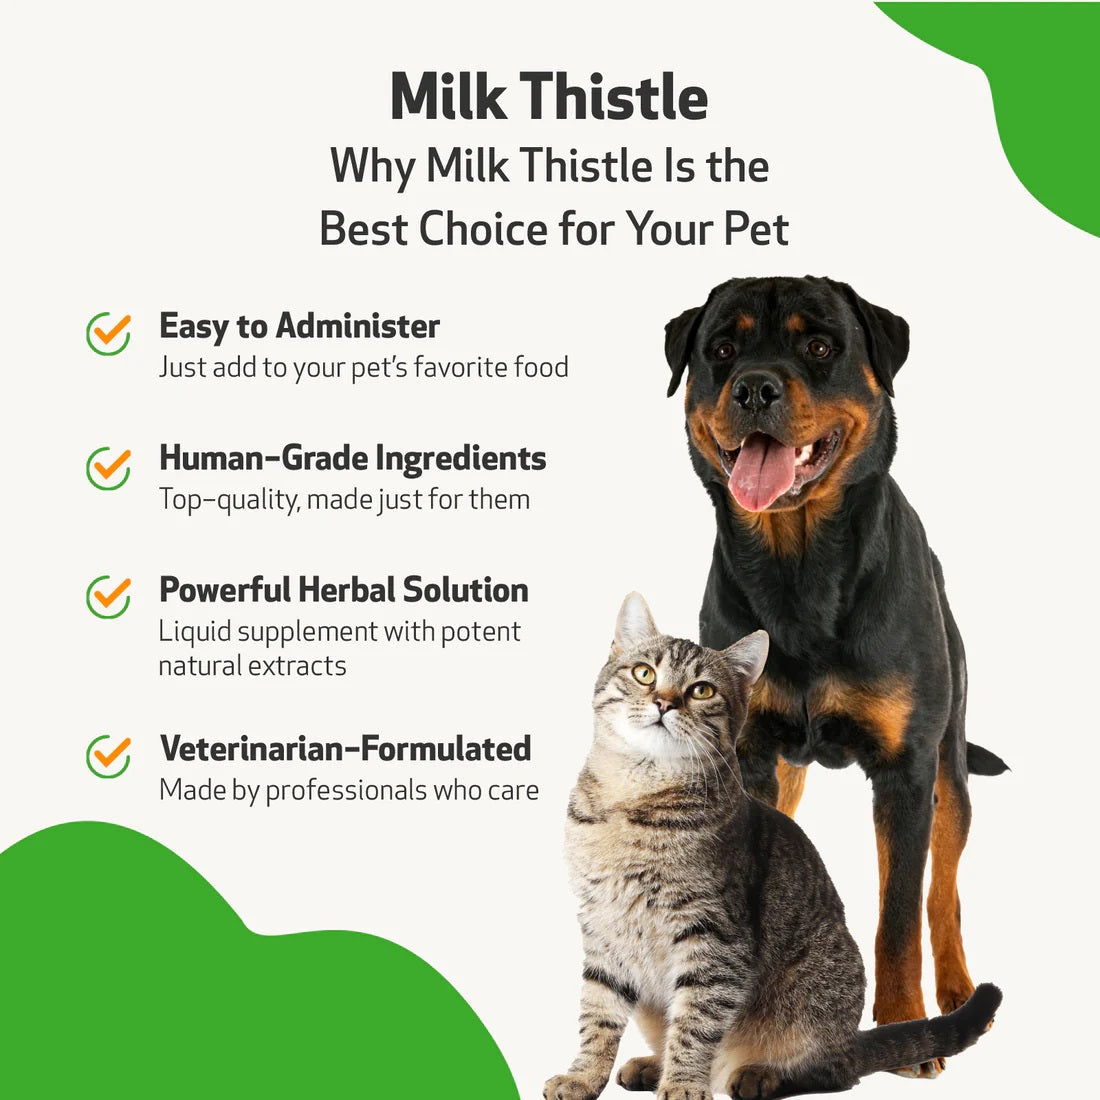 Pet Wellbeing - Milk Thistle - for Healthy Liver Function in Cats & Dogs